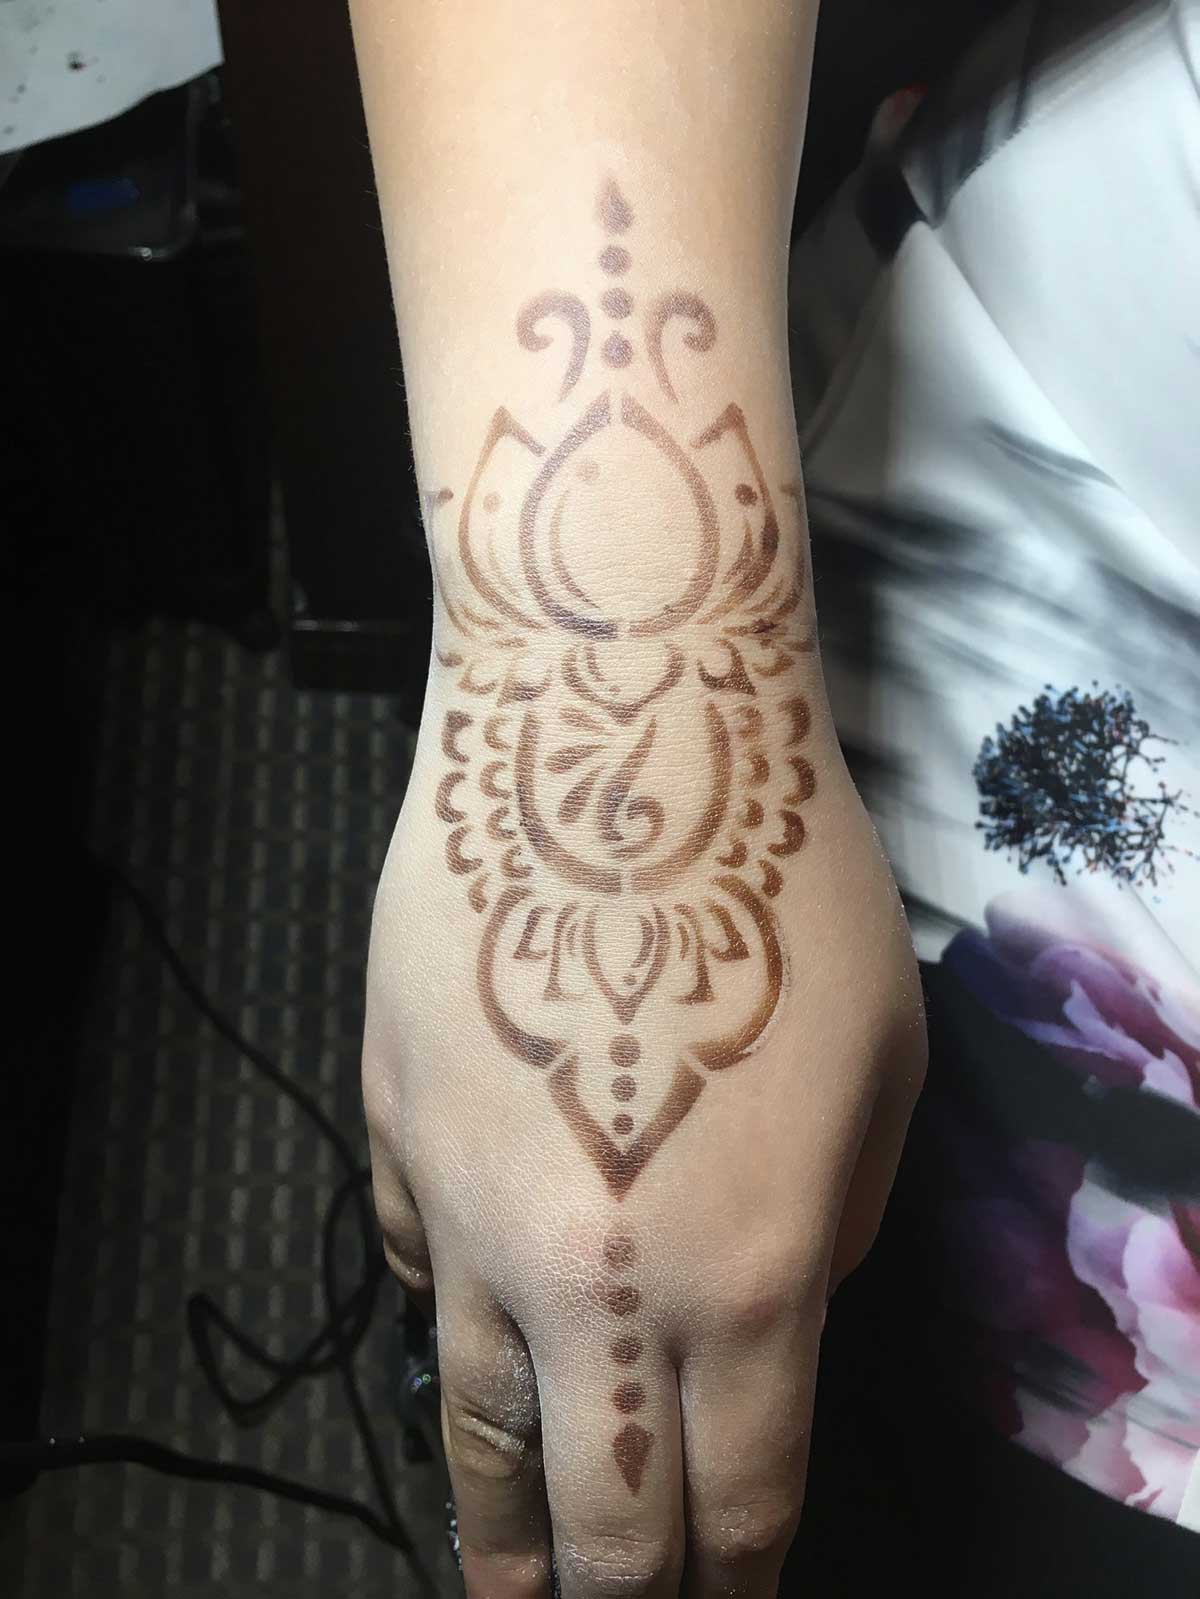 Intricate henna design on a person's hand and forearm.